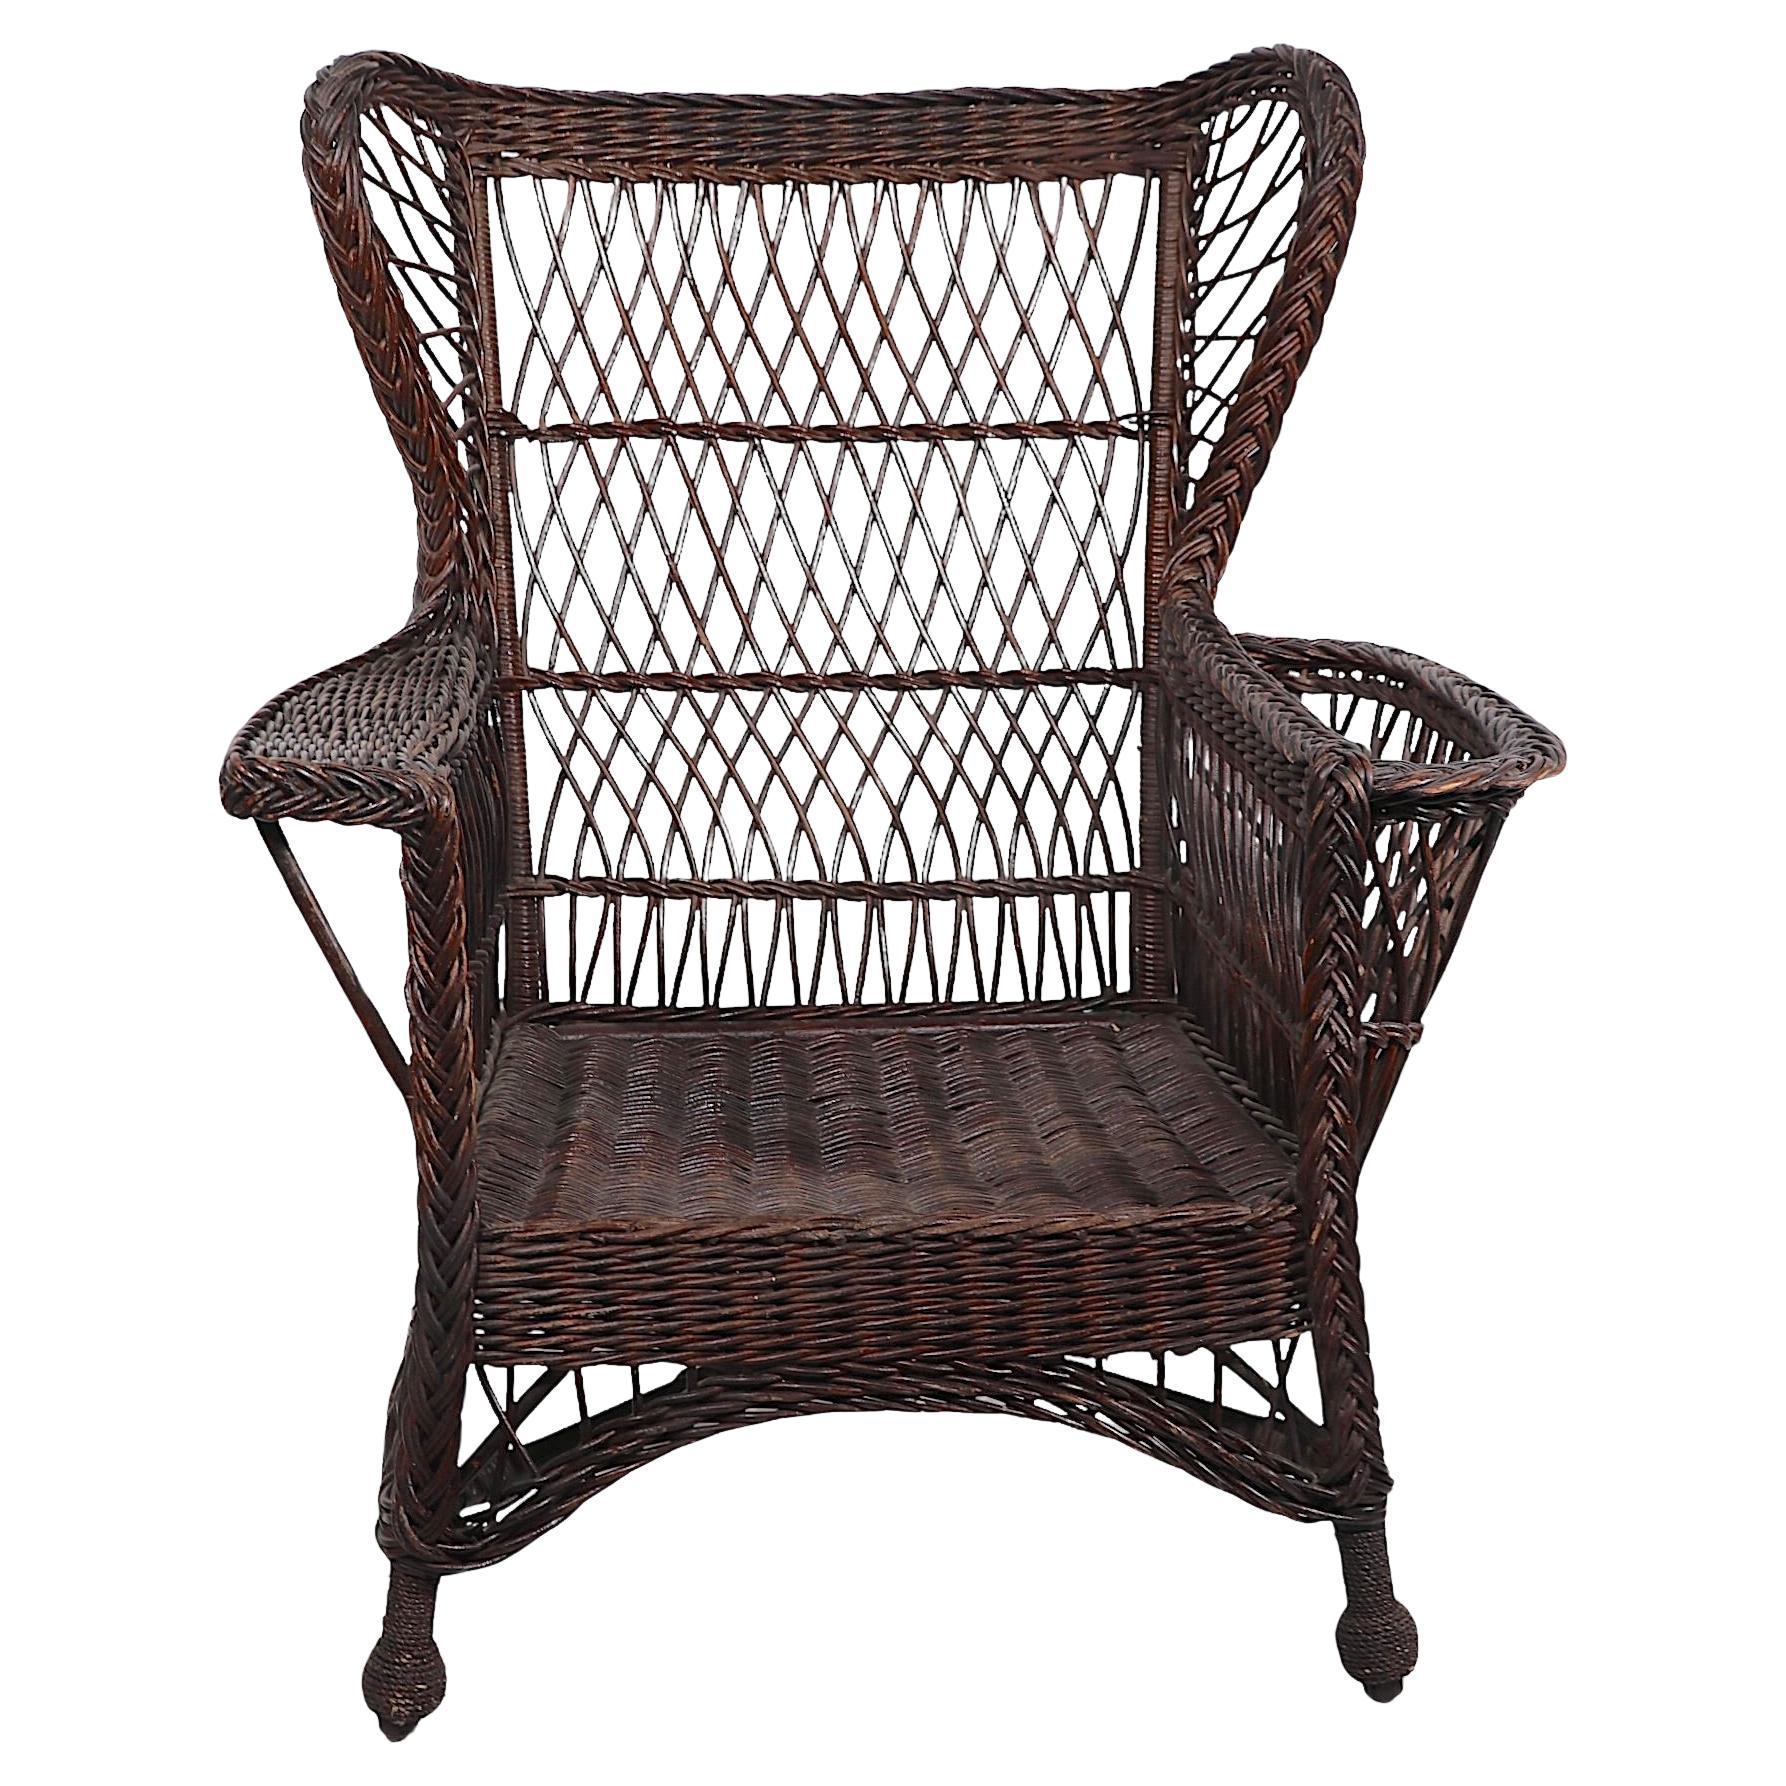 Victorian Bar Harbor Wicker Wing Chair with Magazine Rack Arm For Sale